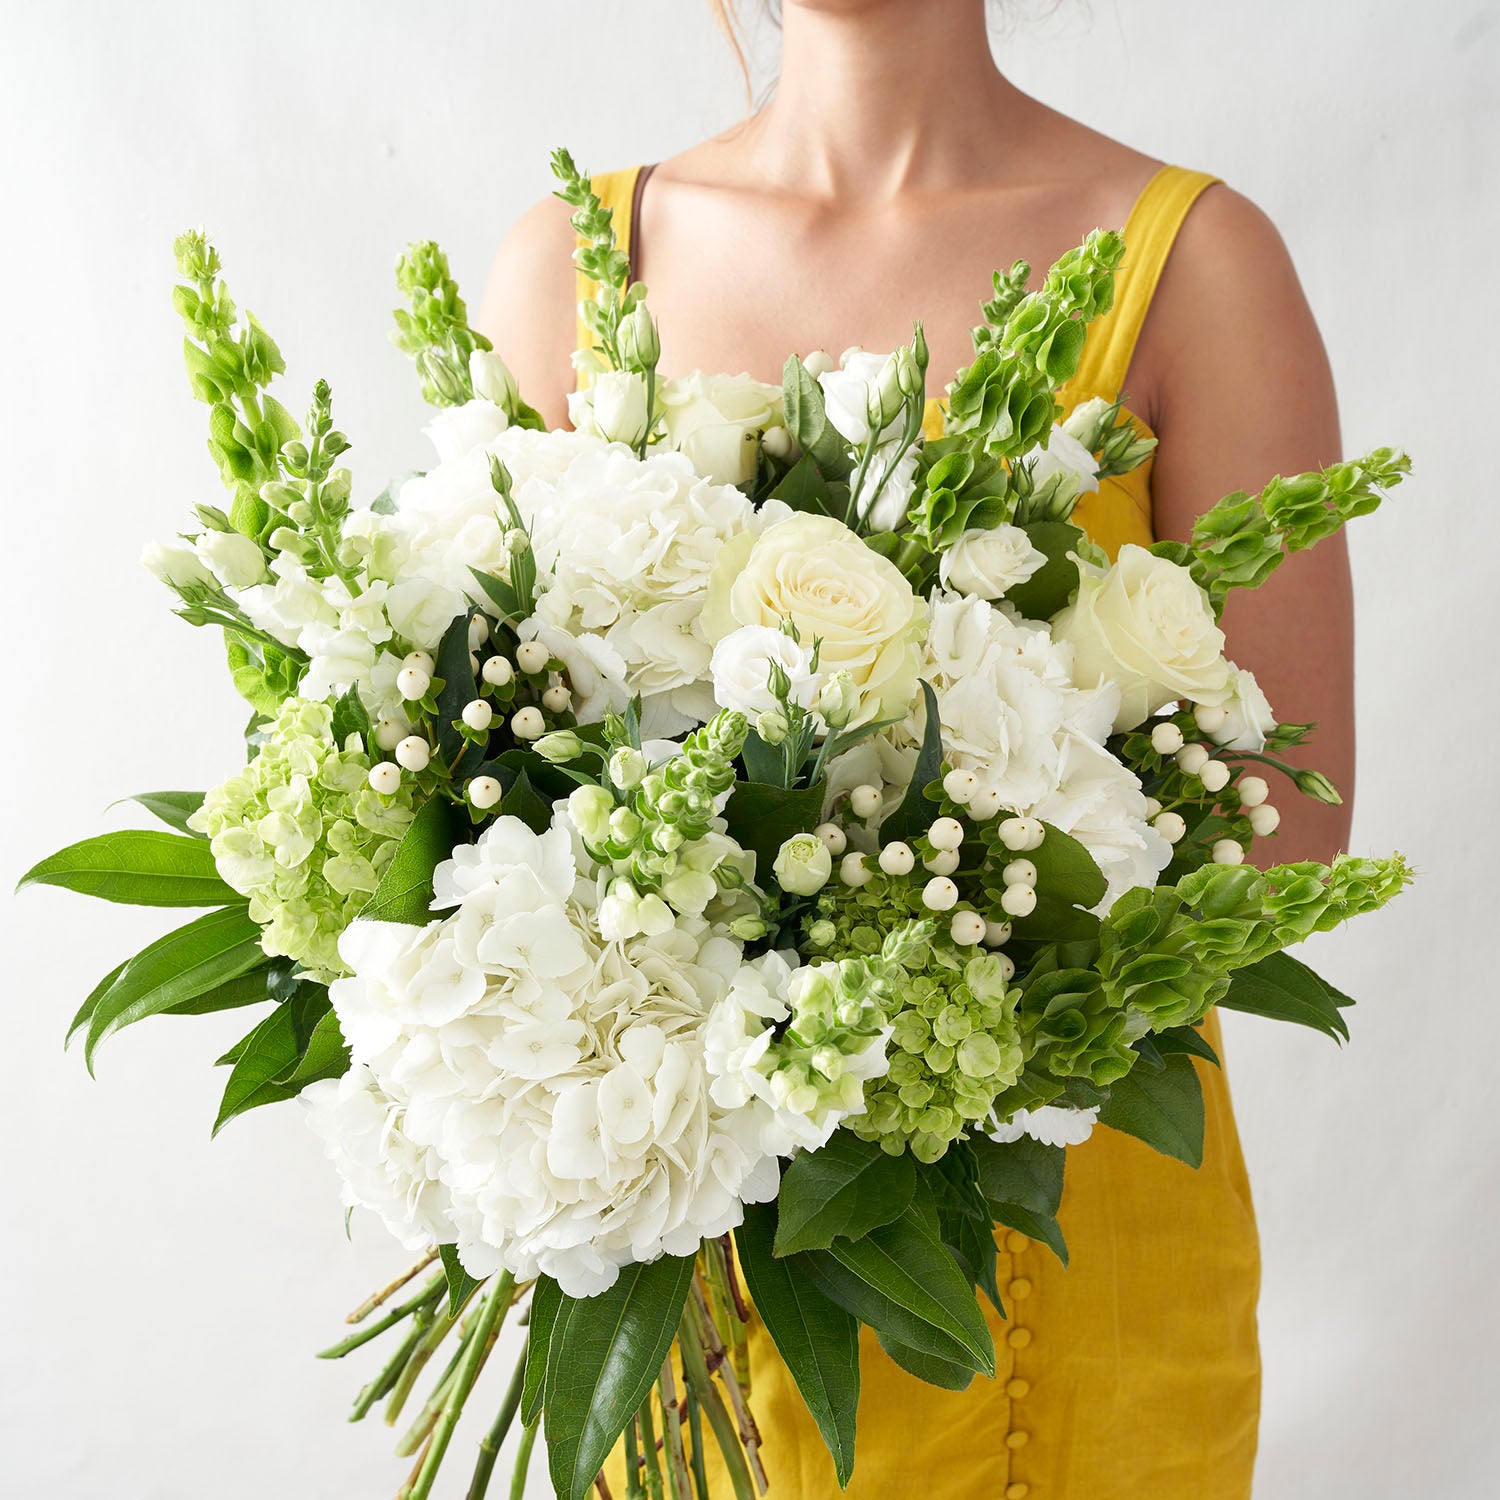 Woman in yellow dress holding large bouqet of white and green hydrangeas, roses, snapdragon,s and bells of Ireland on white background.